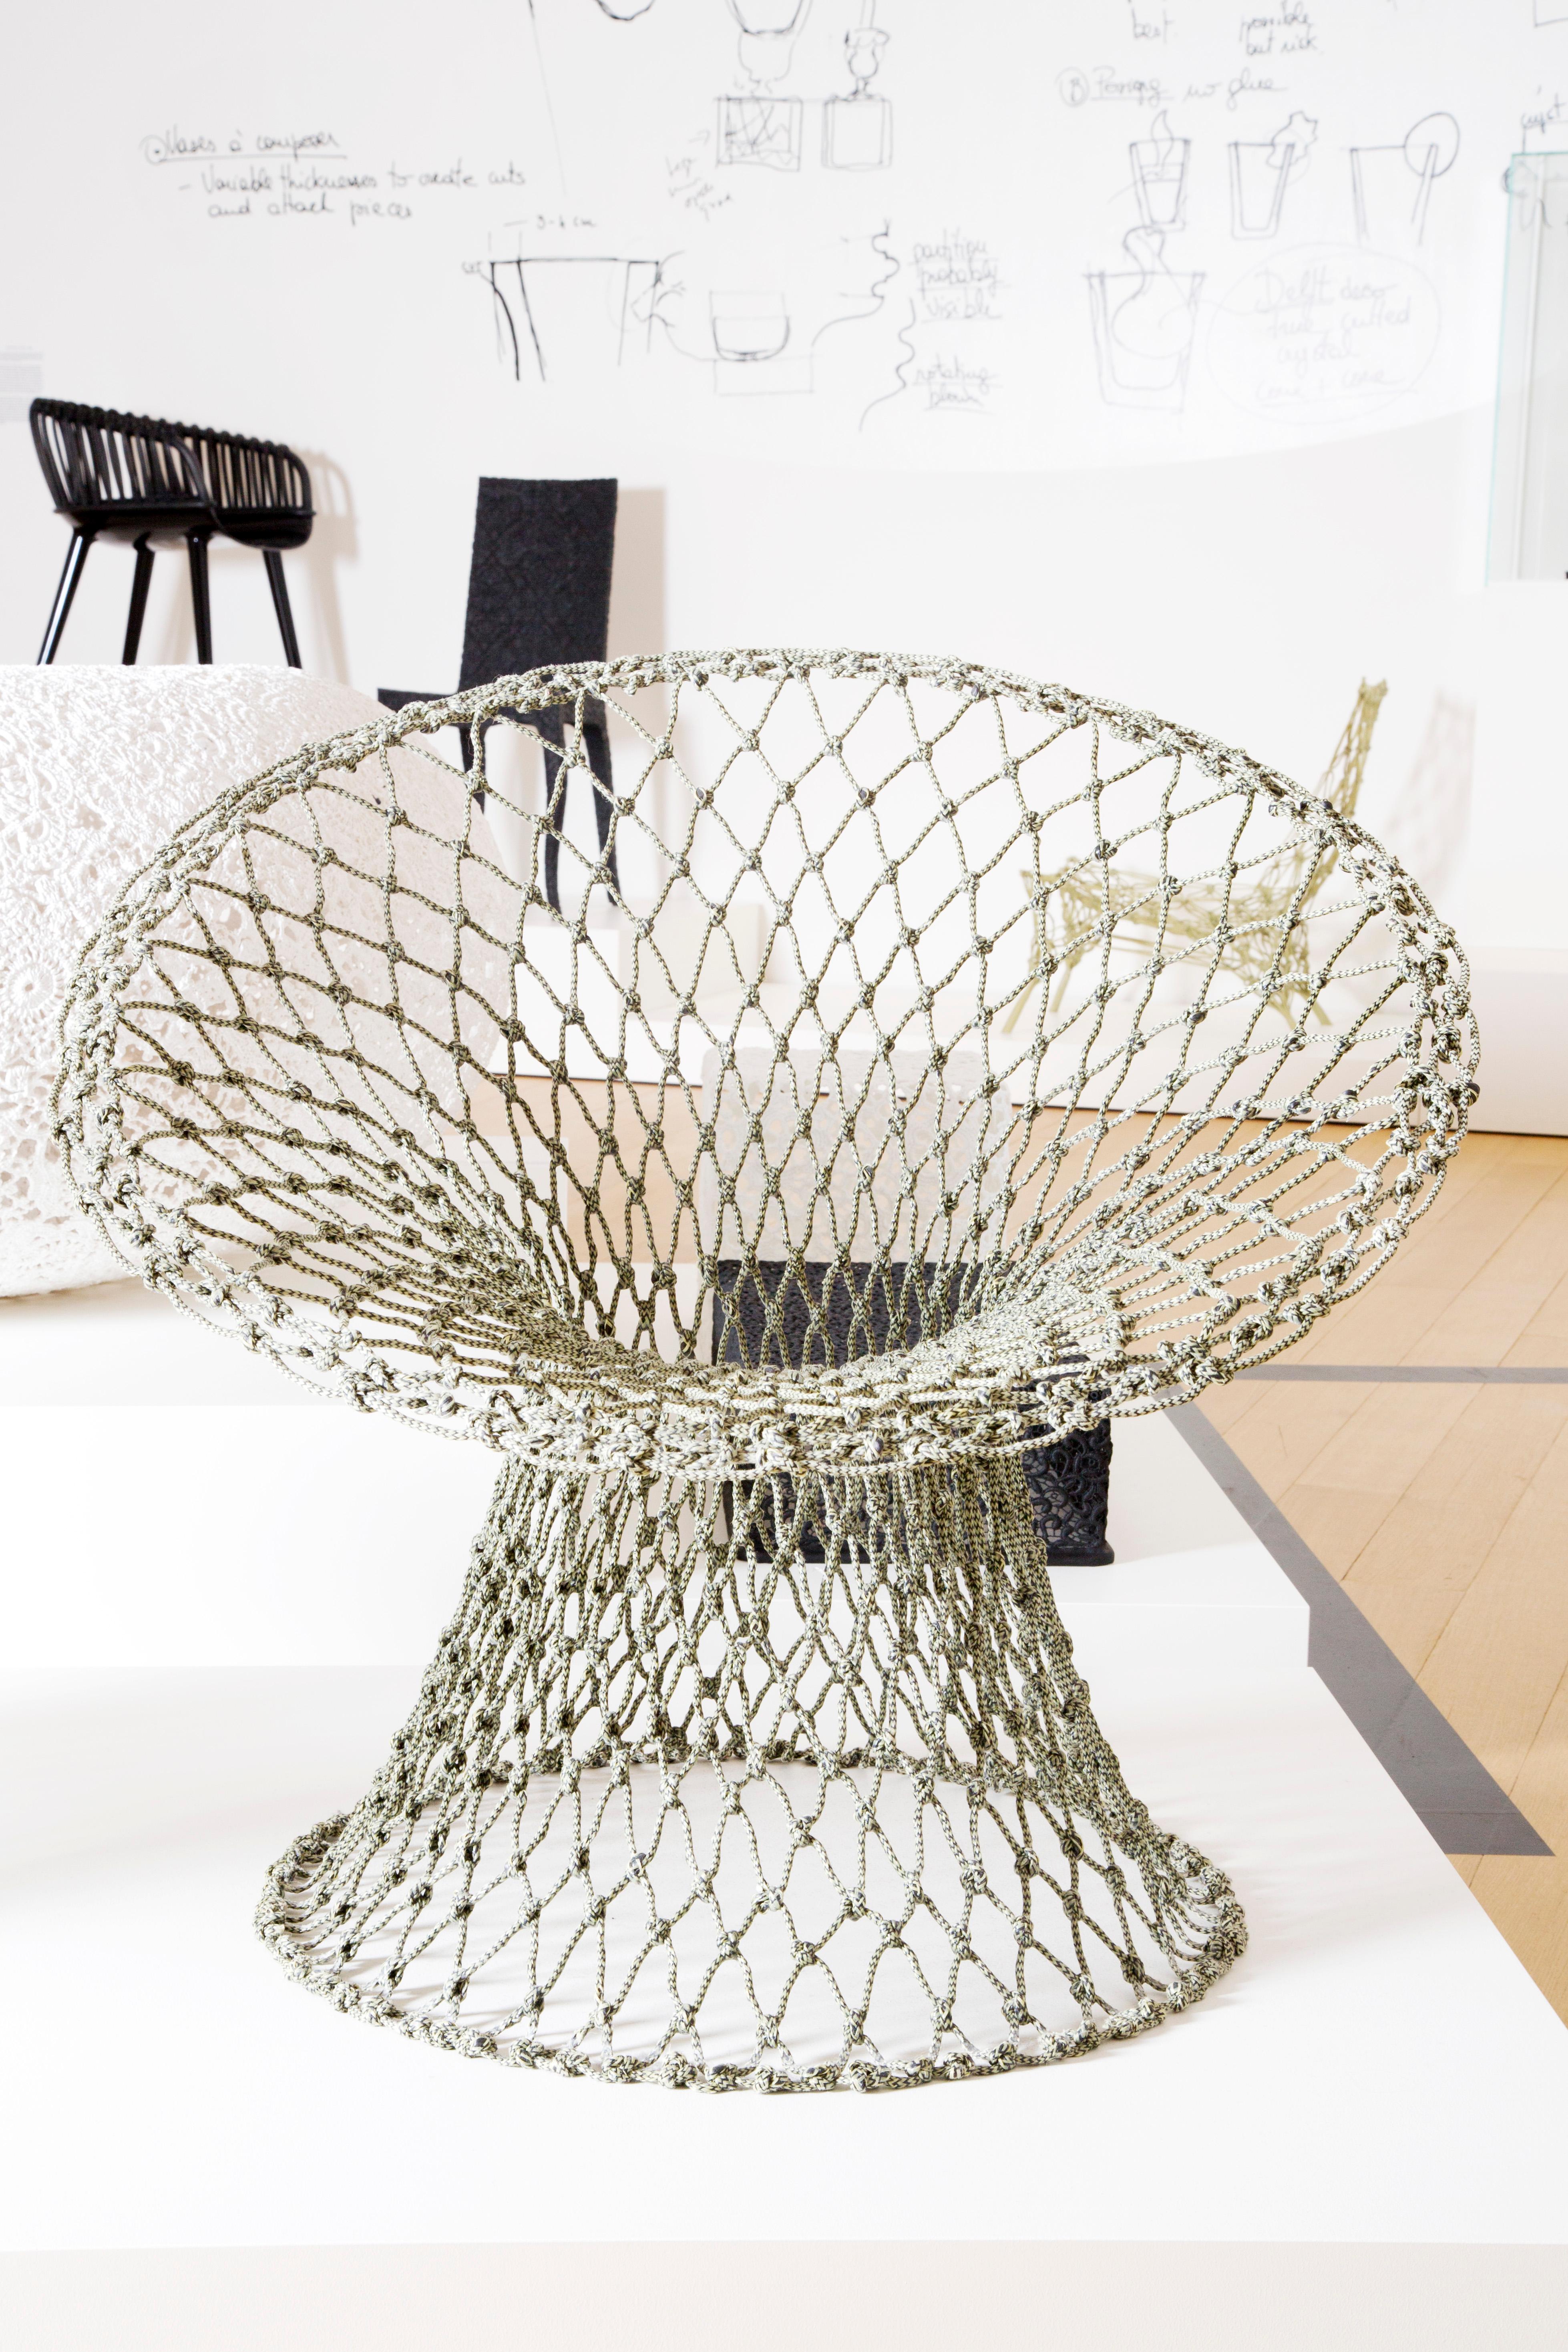 Fishnet Chair, by Marcel Wanders, Hand-Knotted Chair, 2001, Green In New Condition For Sale In Amsterdam, NL